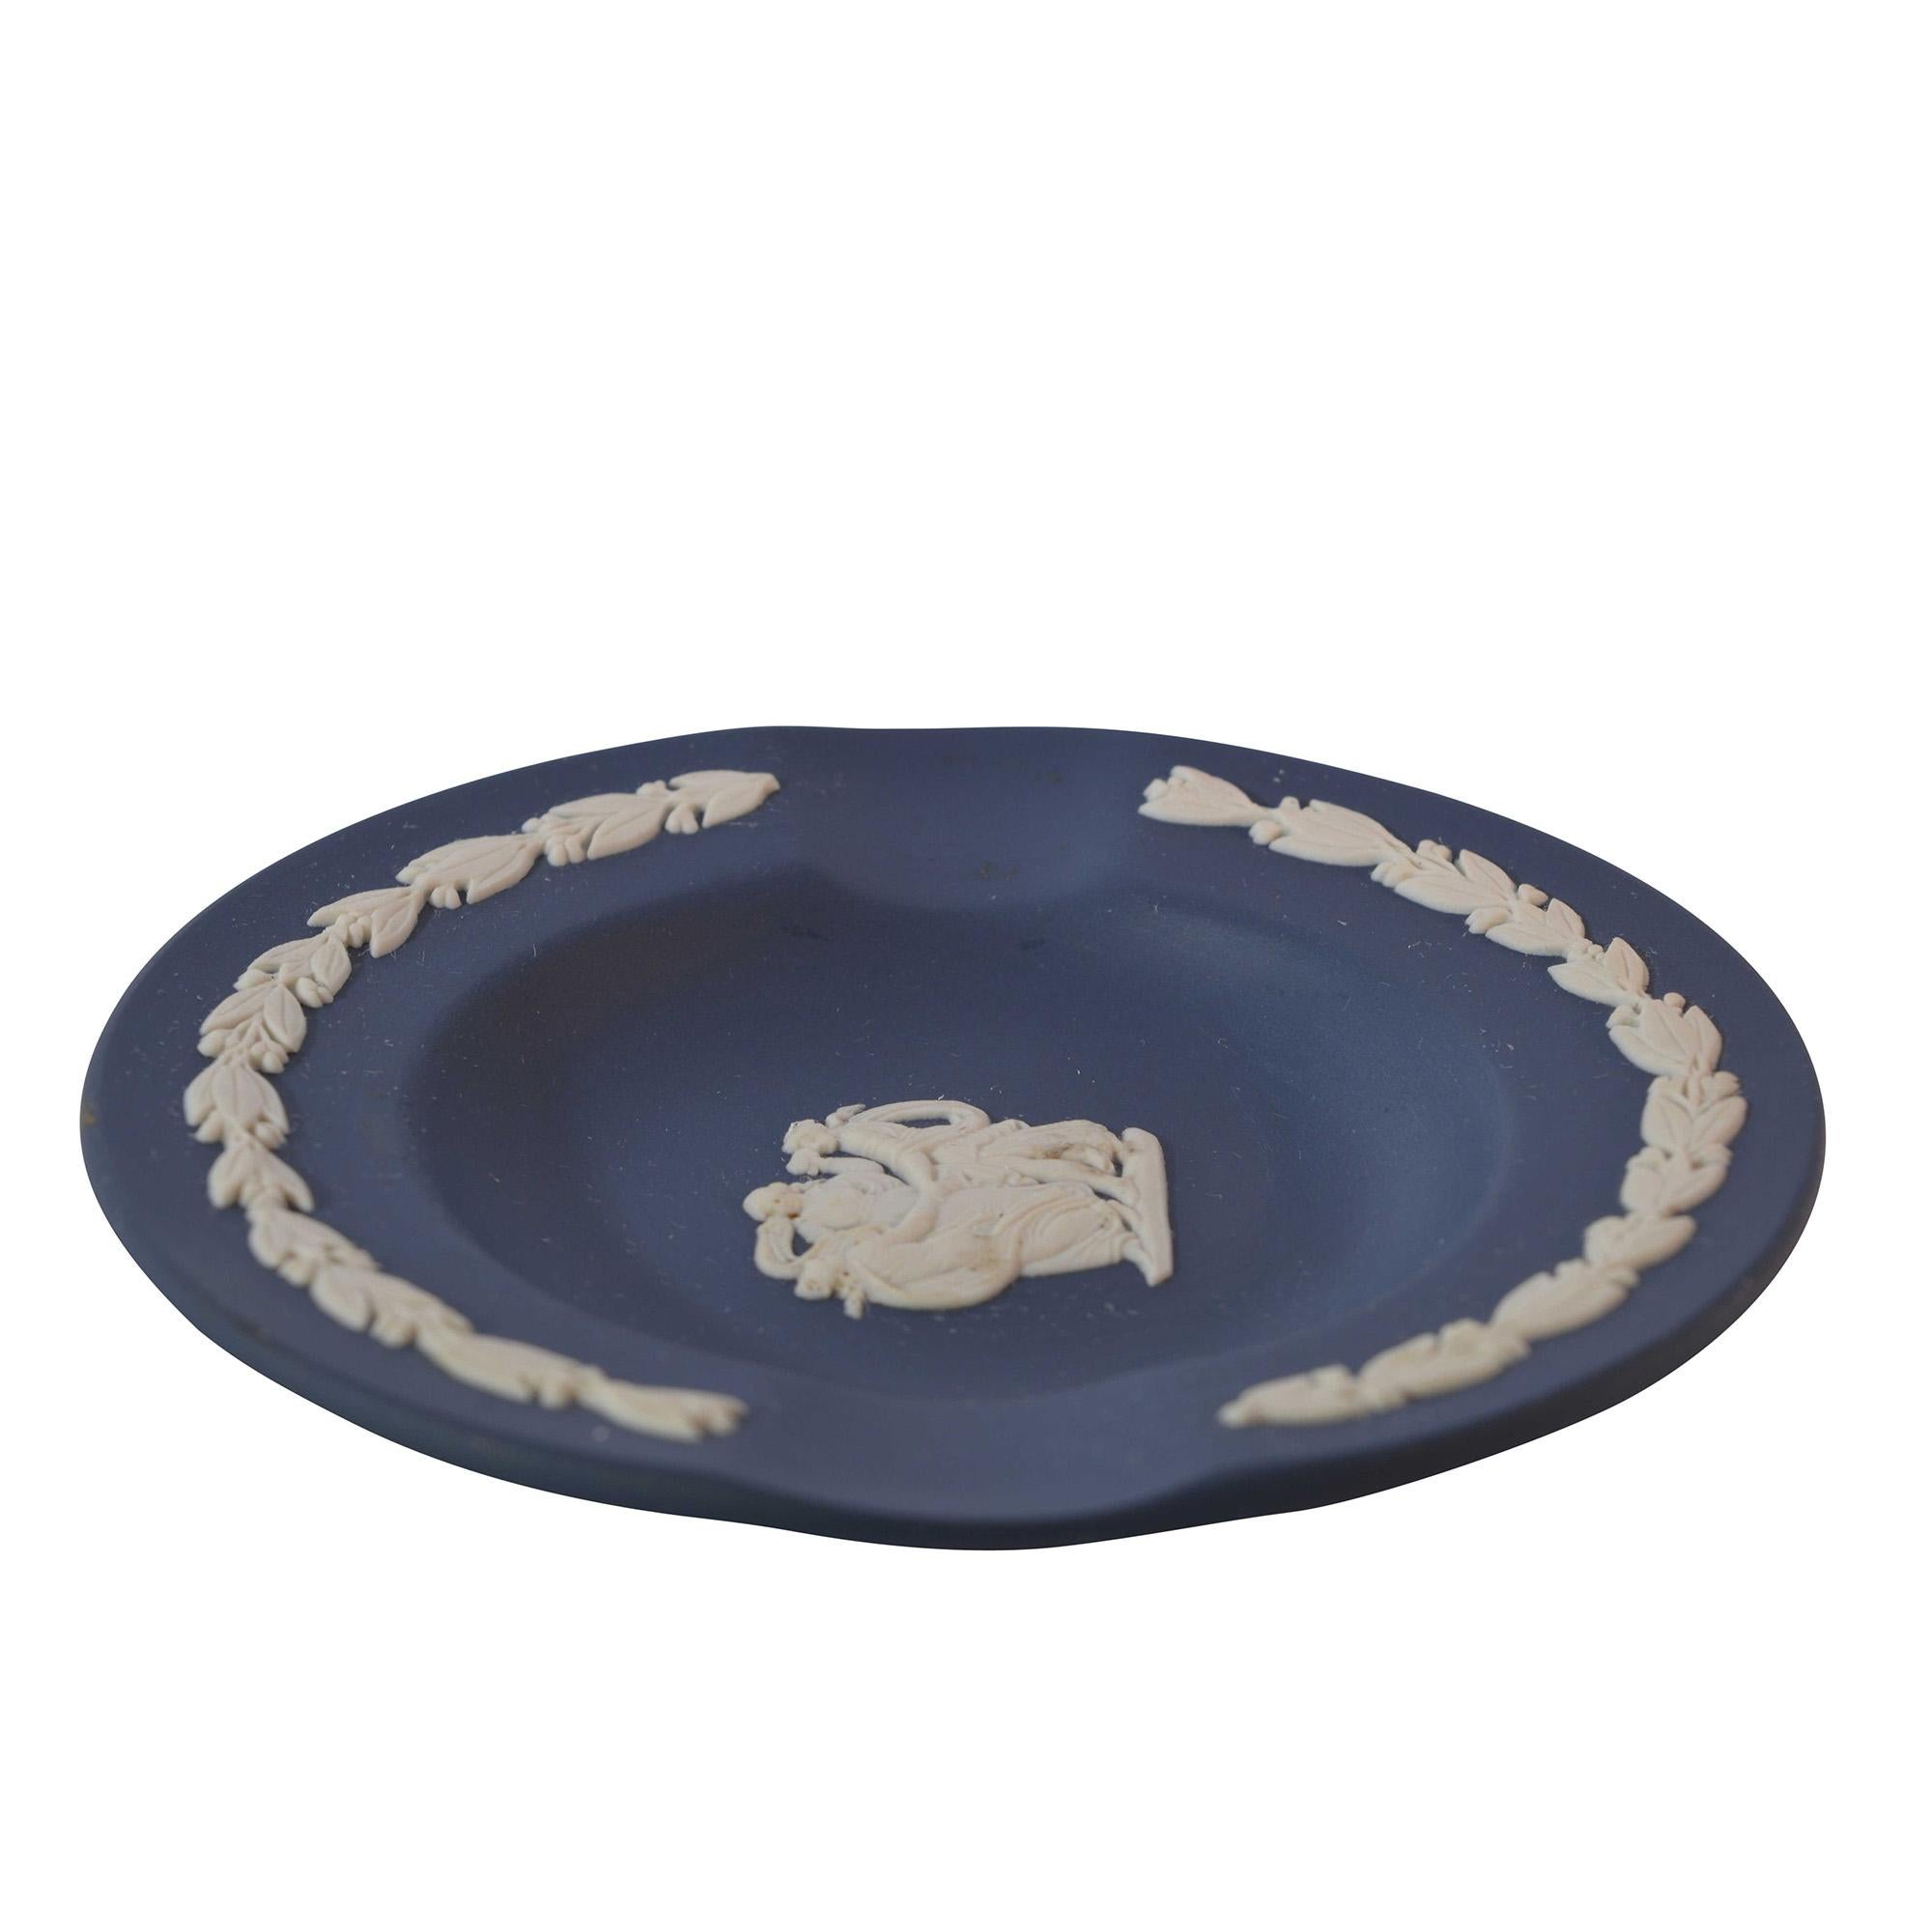 The vintage ashtray features a centre relief design in ivory on a dark blue base. The ivory detail continues around the edge. 

Dimensions: 3.5